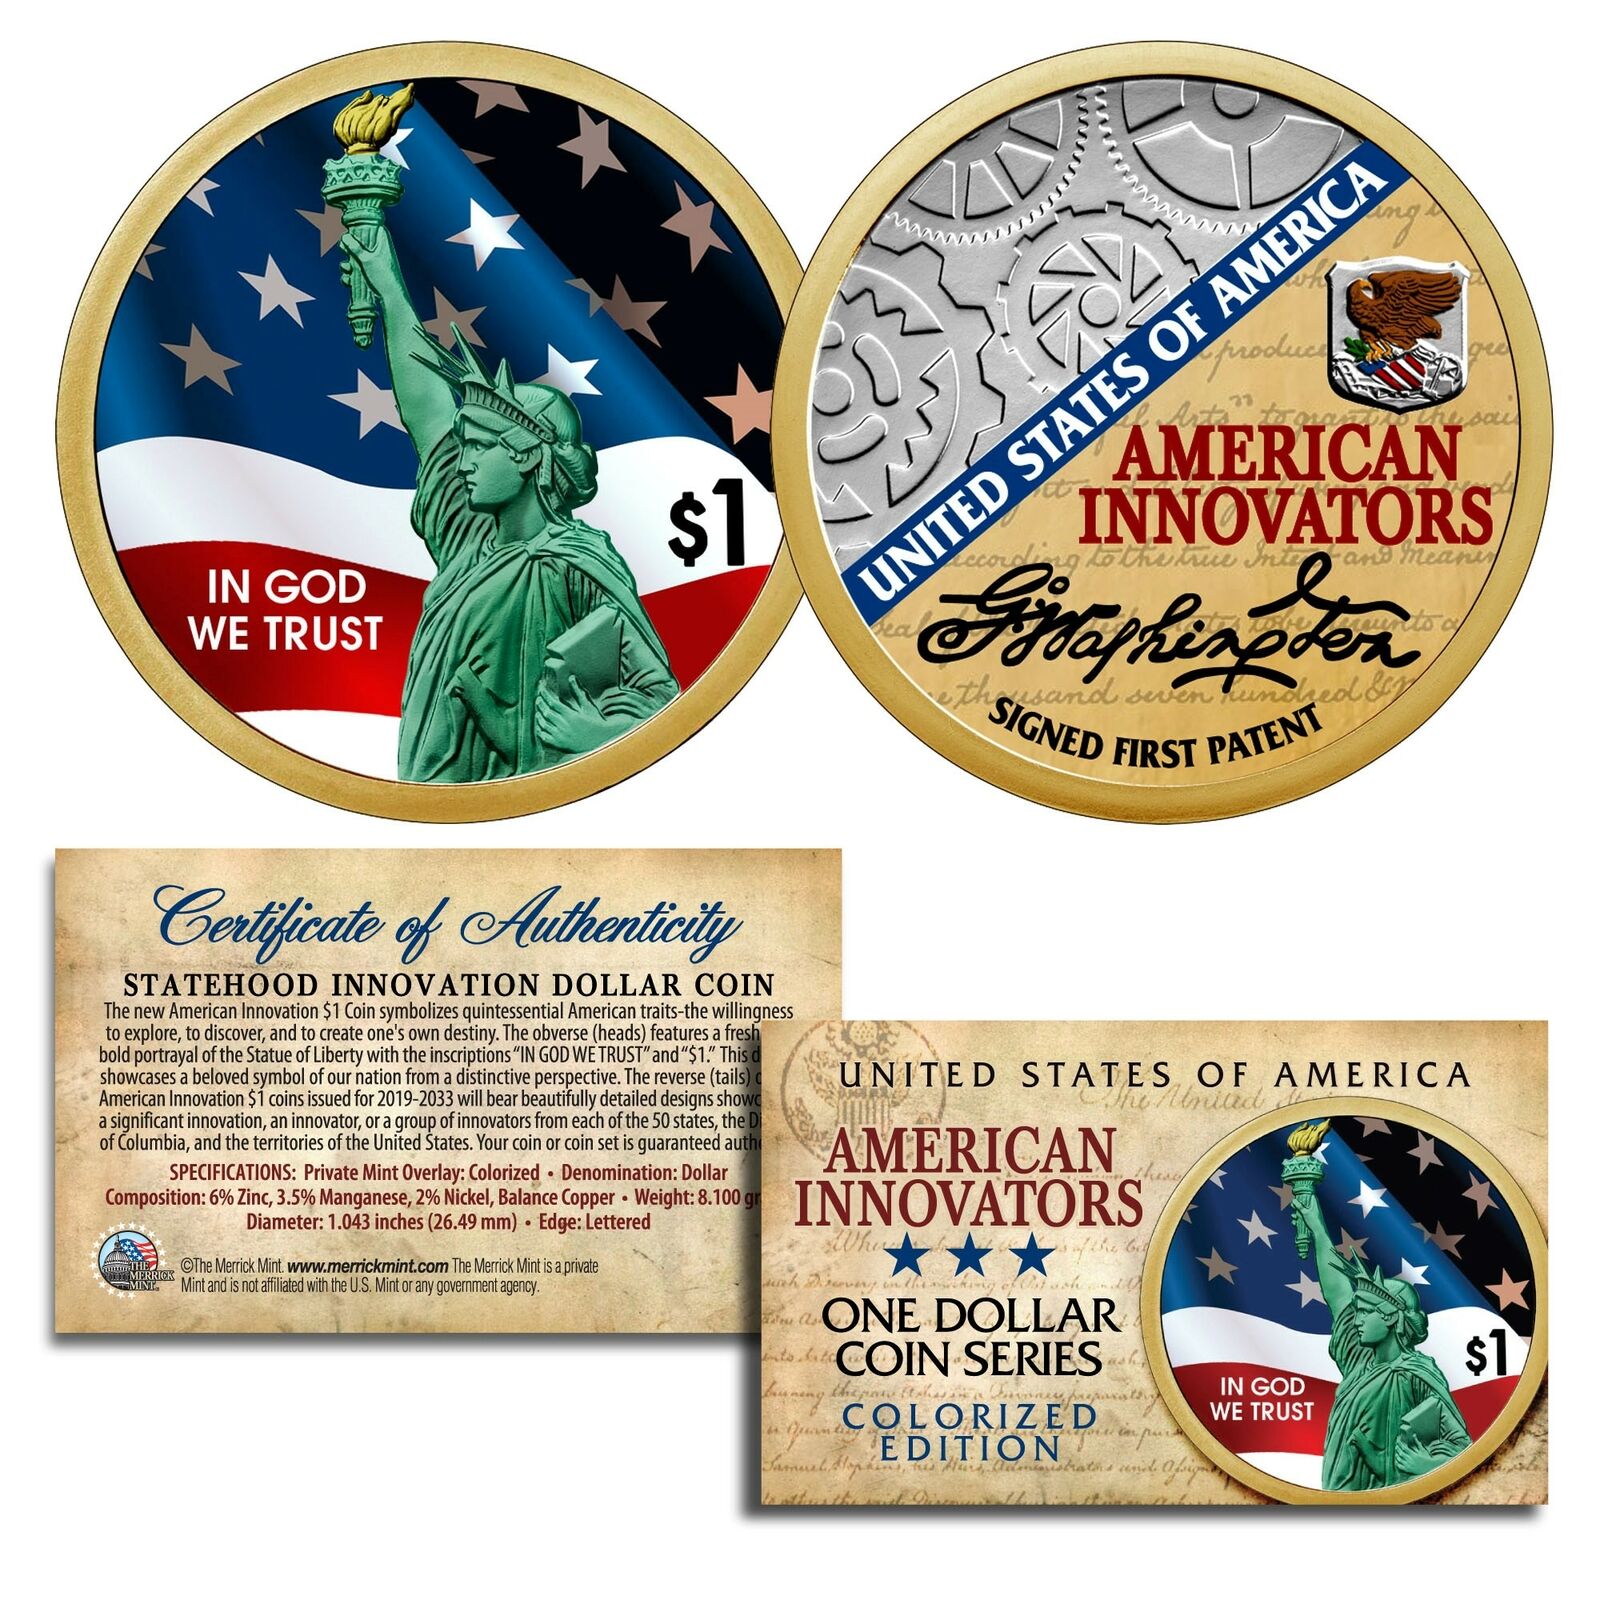 American Innovation State $1 Dollar Coin Series - 2018 1st Release COLOR 2-Sided